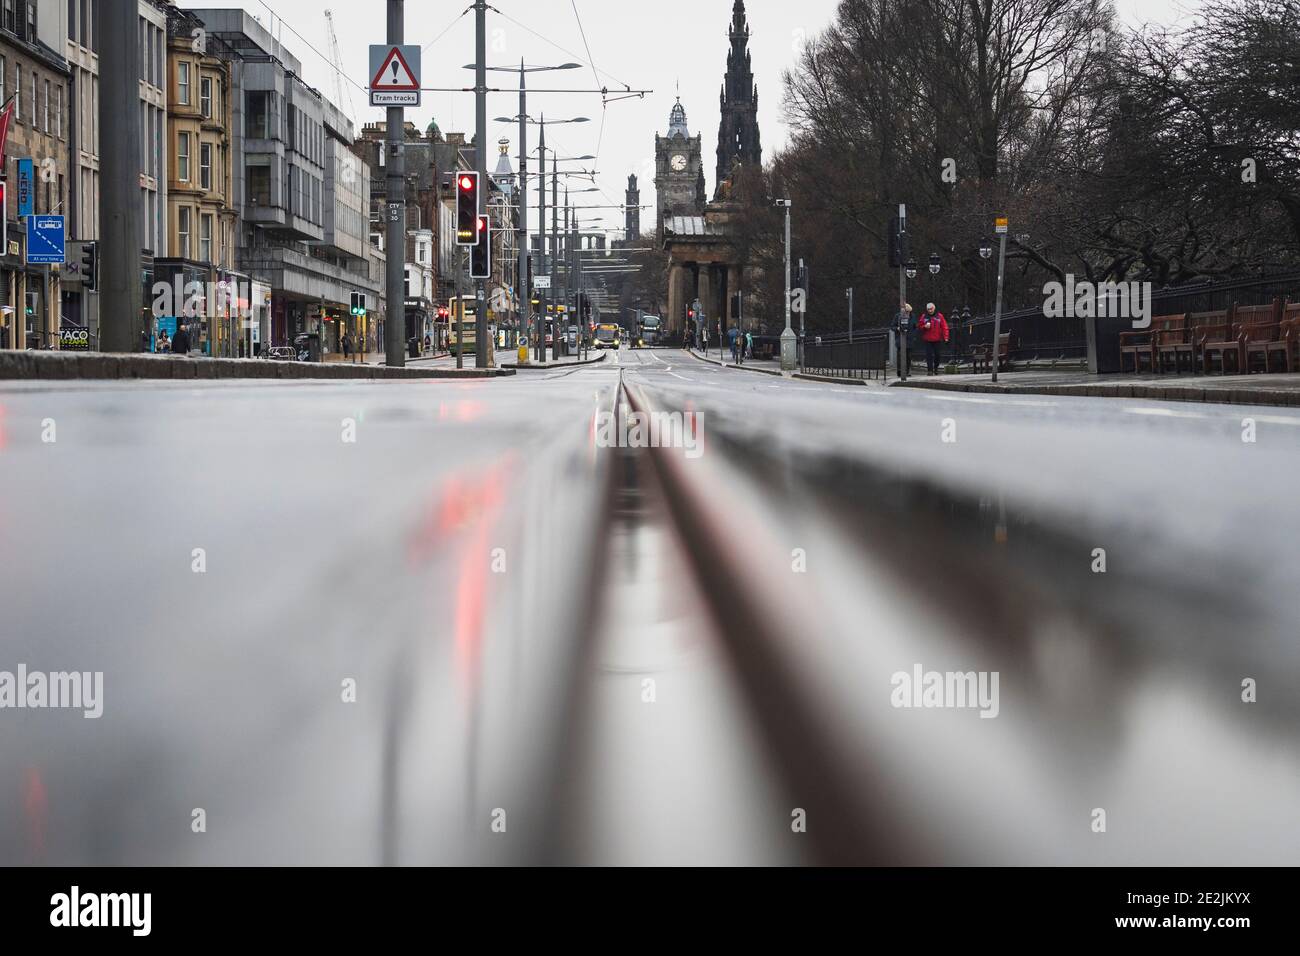 Edinburgh, Scotland, UK. 14 January 2021. Views of Edinburgh City Centre during national lockdown before click & collect and takeaway services from cafes and restaurants are further restricted following rule changes from Scottish Government. Pic. Traffic on princes Street is very quiet.   Iain Masterton/Alamy Live News Stock Photo